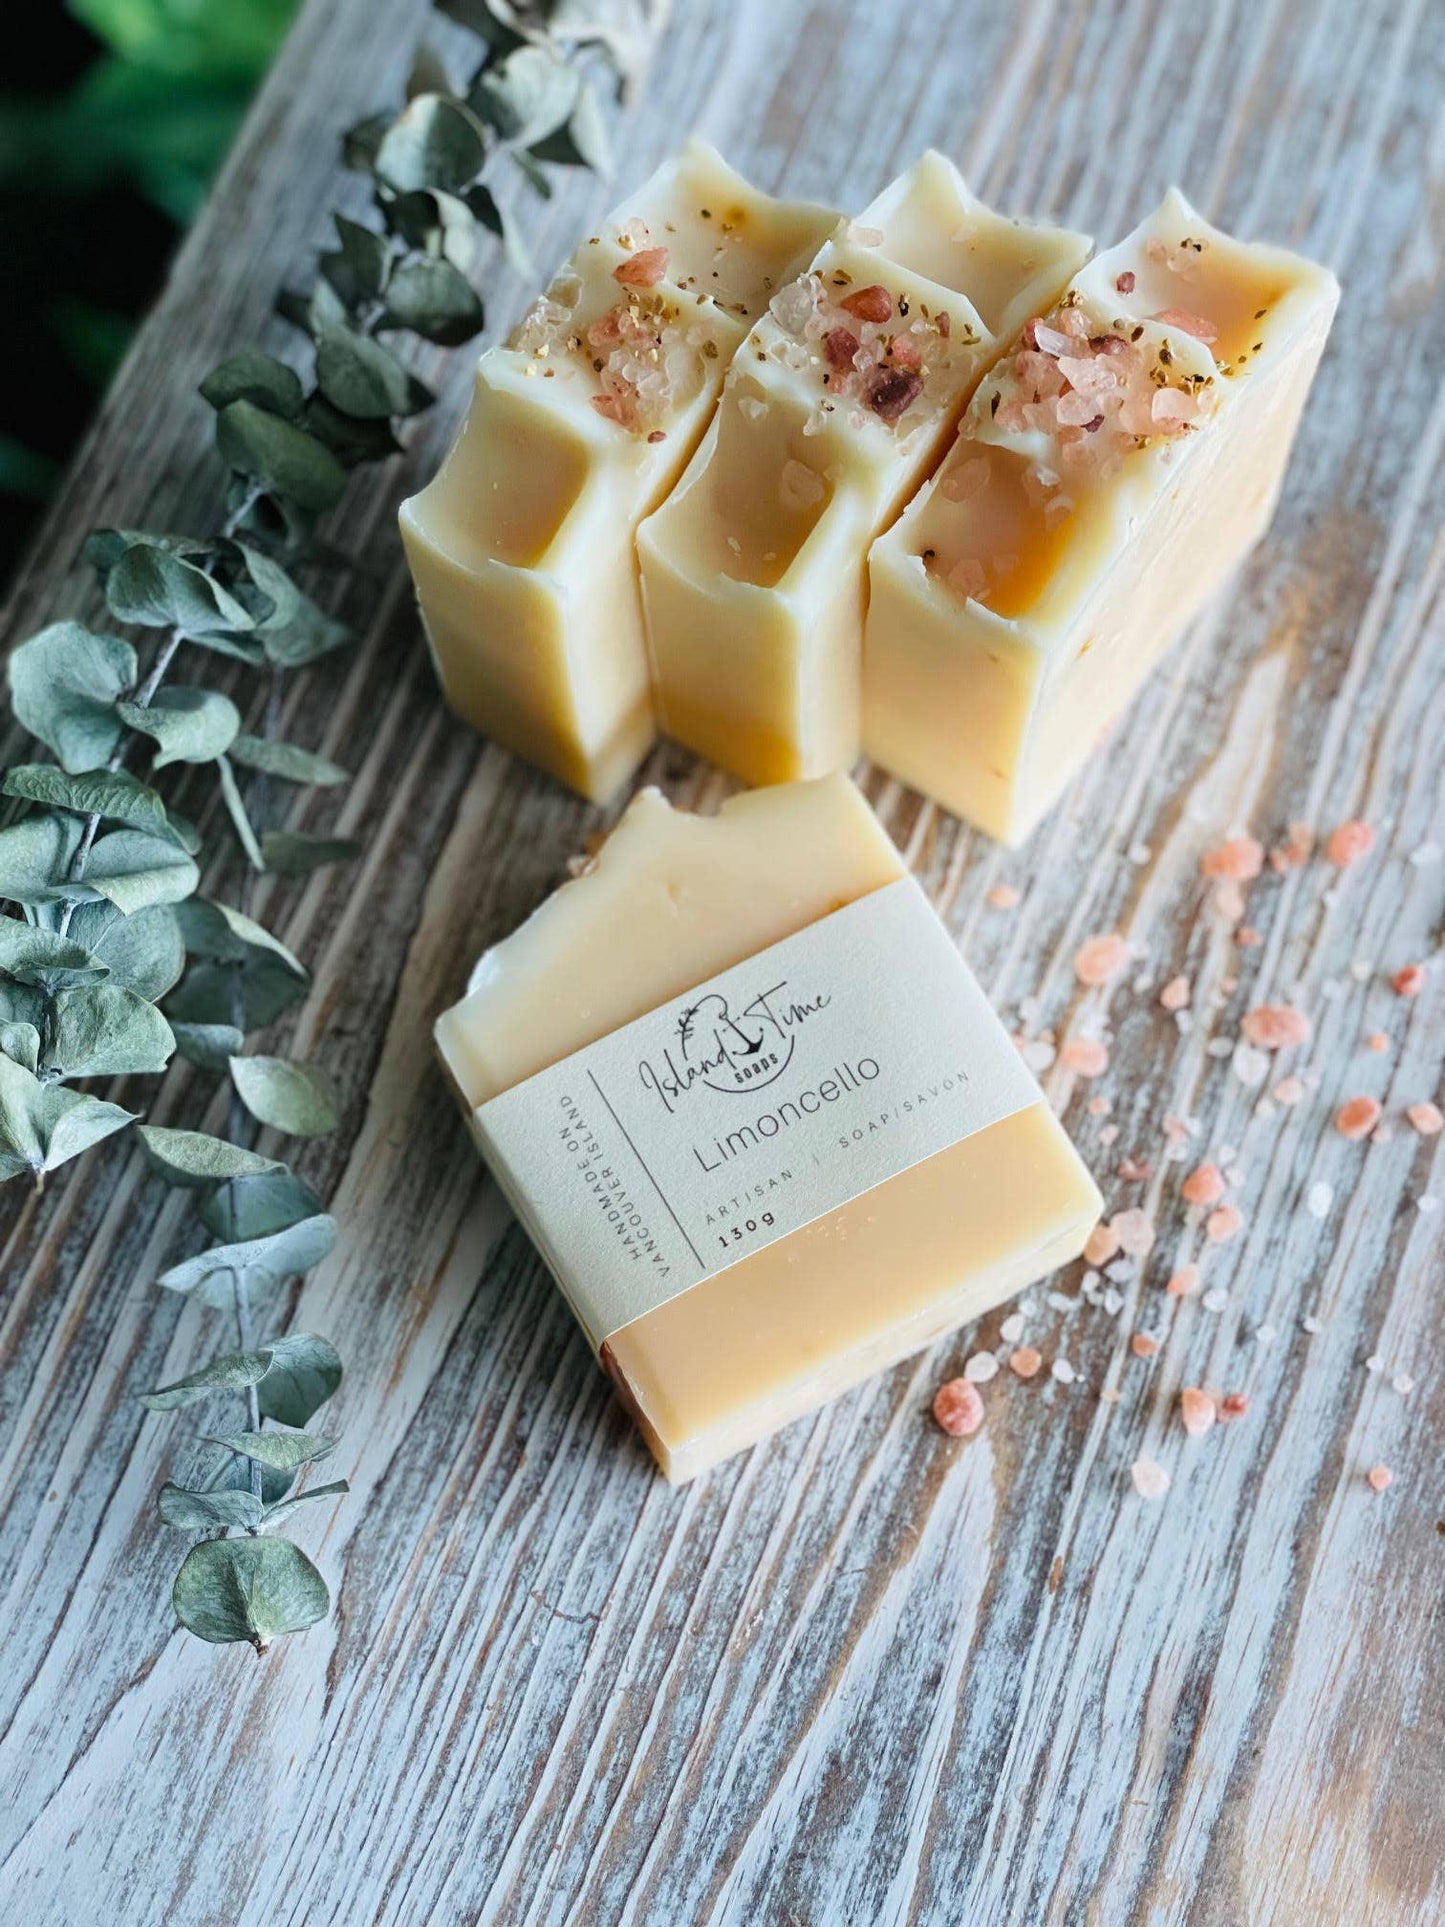 Island Time Soap + Candle - All Natural Limoncello Handmade Artisan Soap